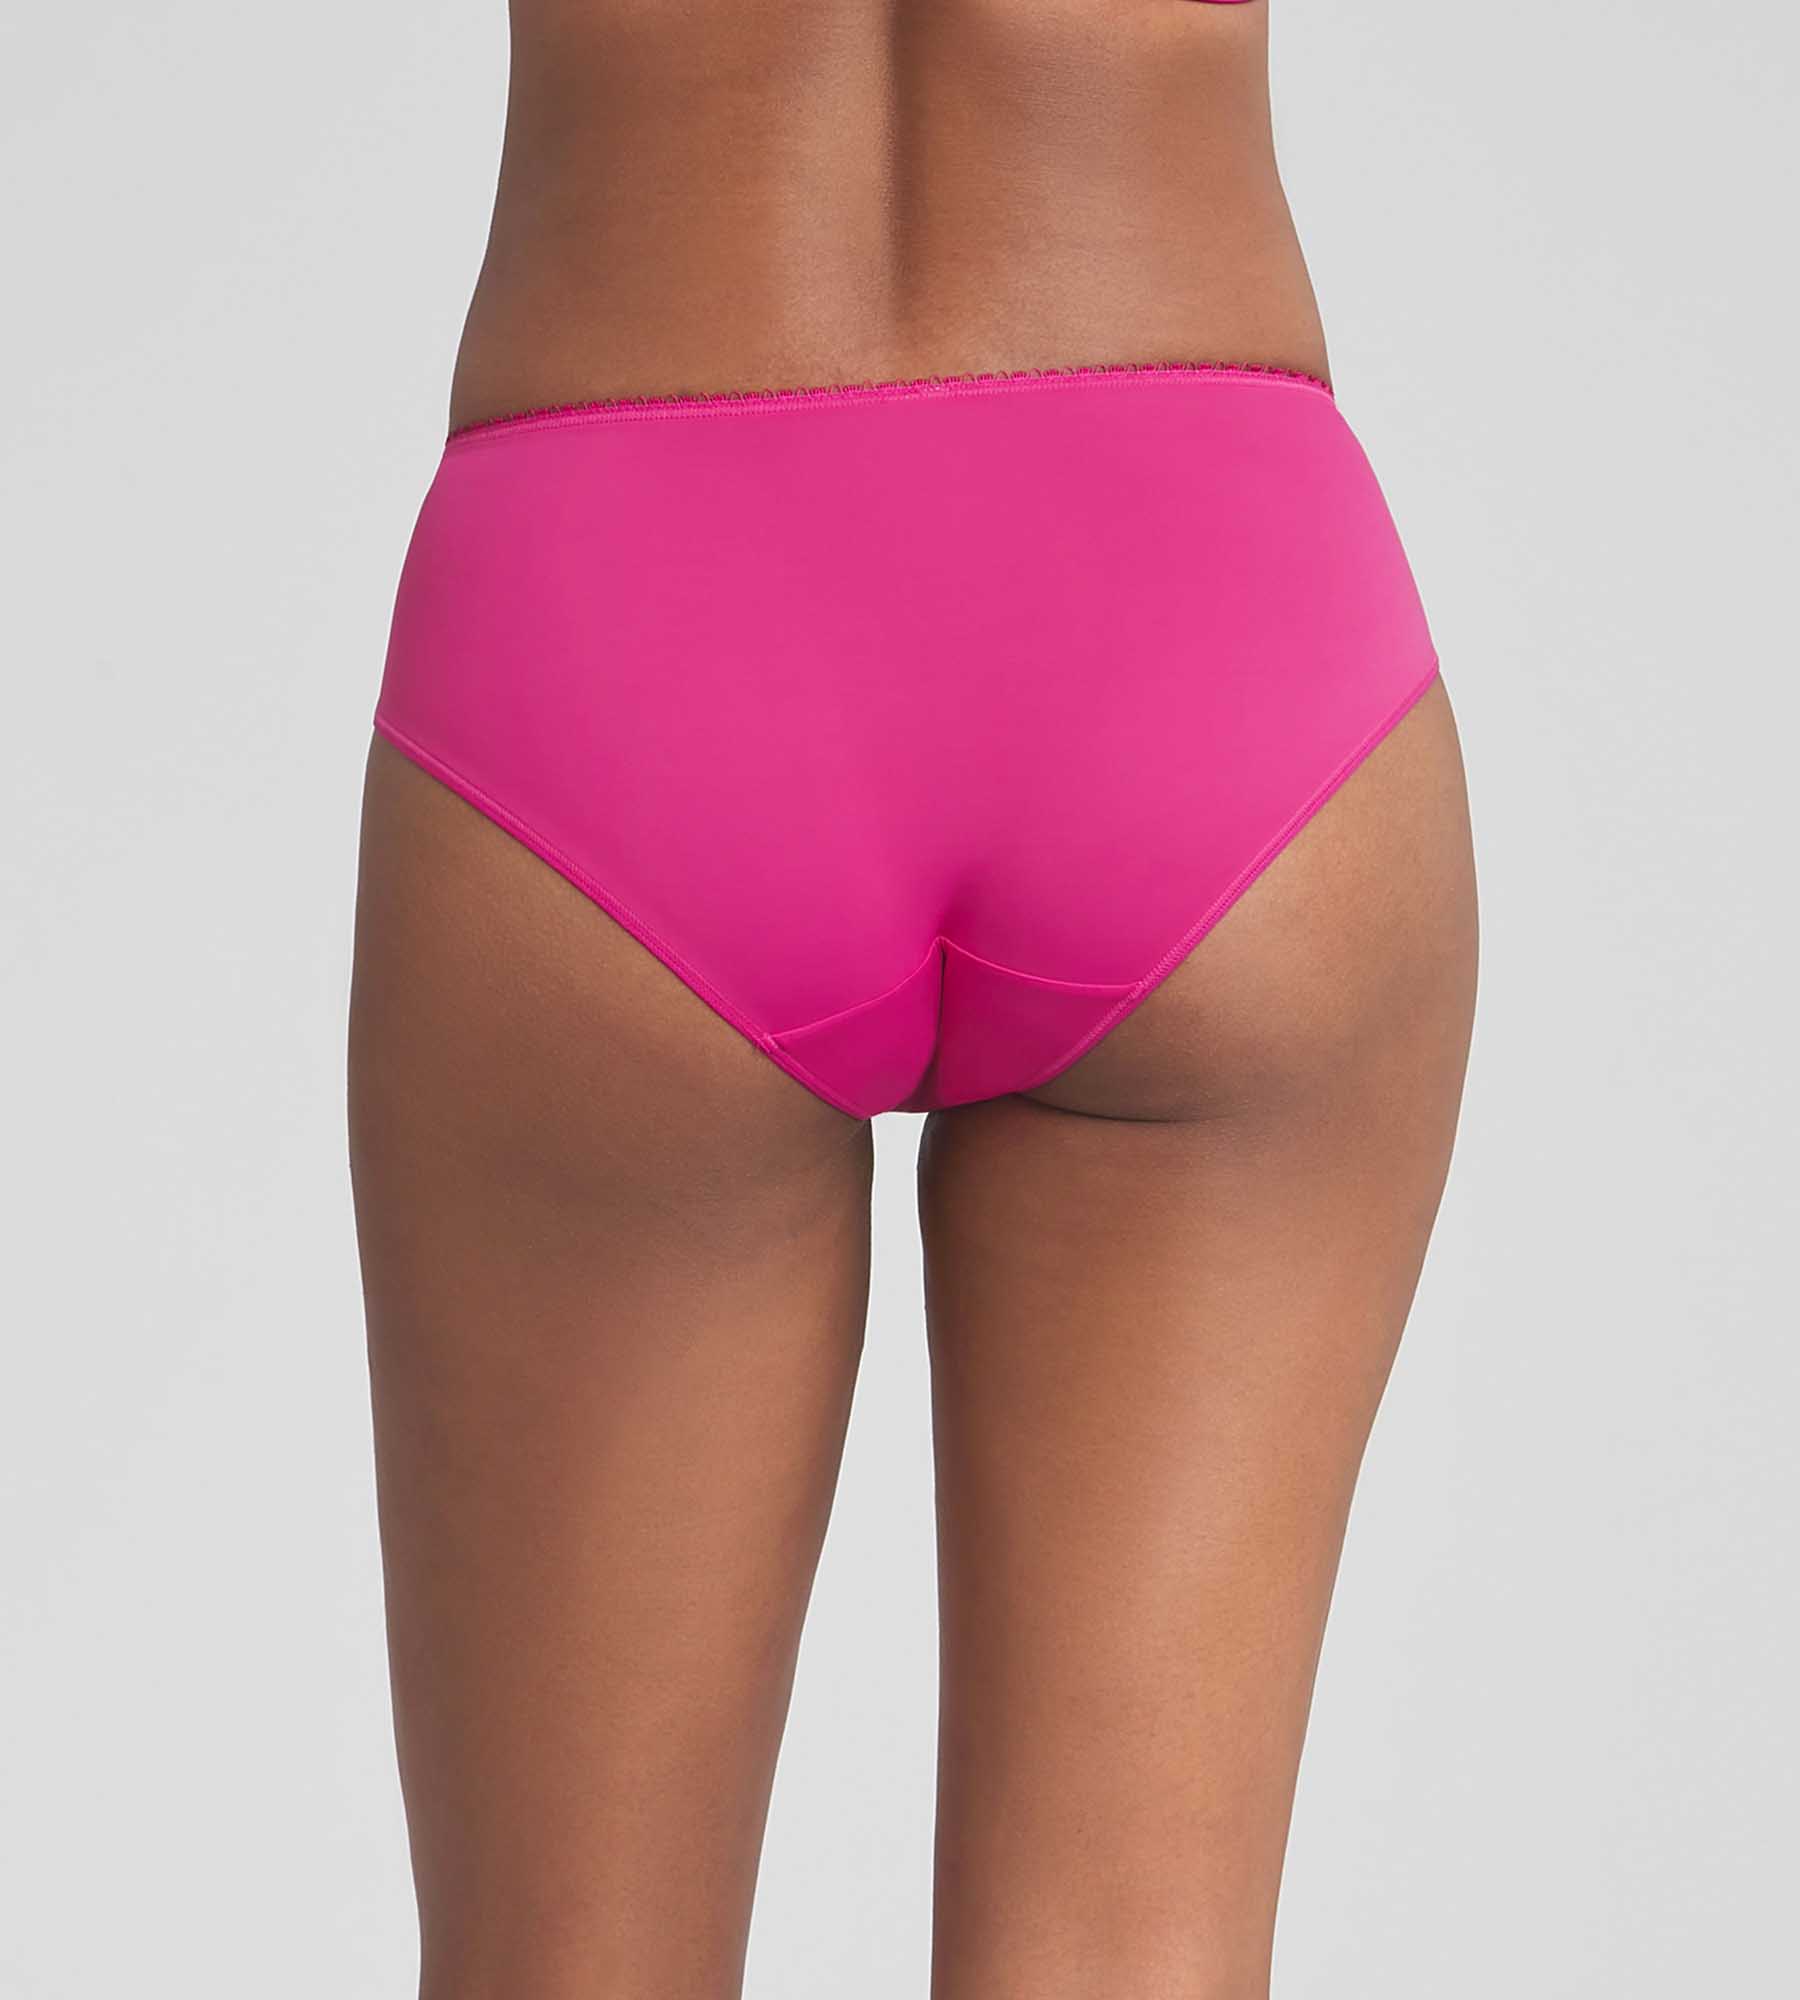 Beau Daiquiri Sexy Knickers in Hot Pink - For Her from The Luxe Company UK